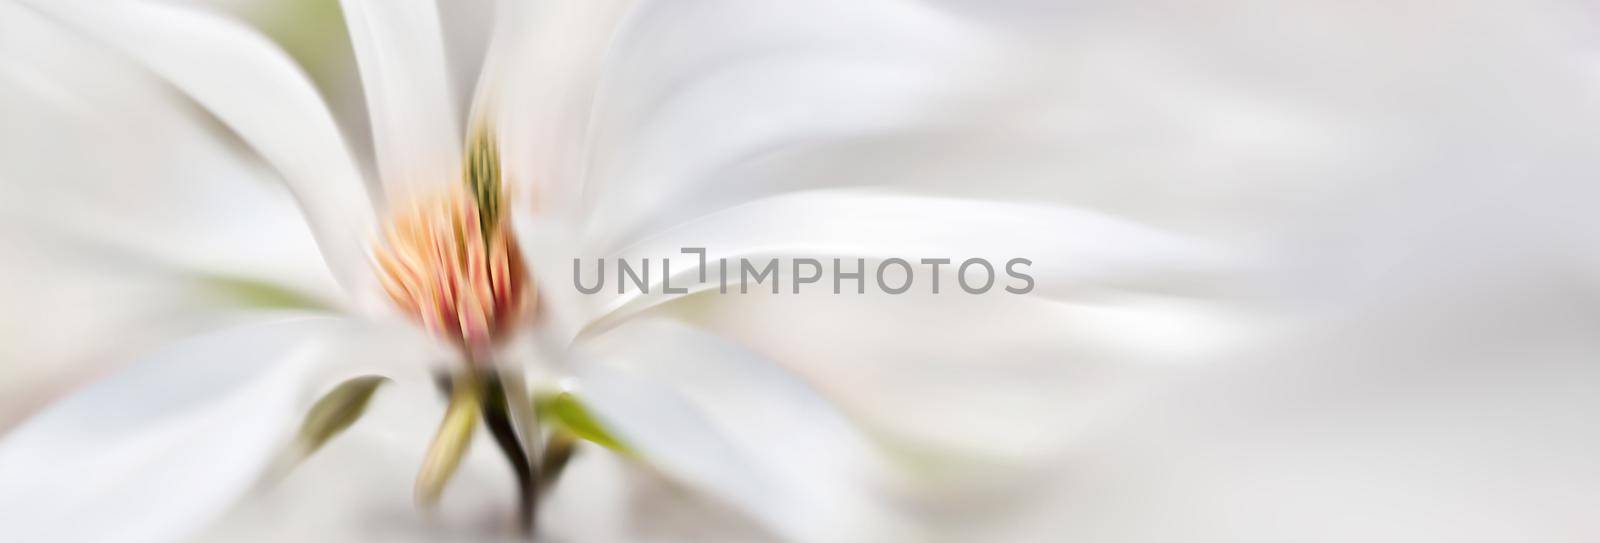 Abstract blurred flowers. Intentional motion blur. Magnolia kobus. Blooming tree with white flowers